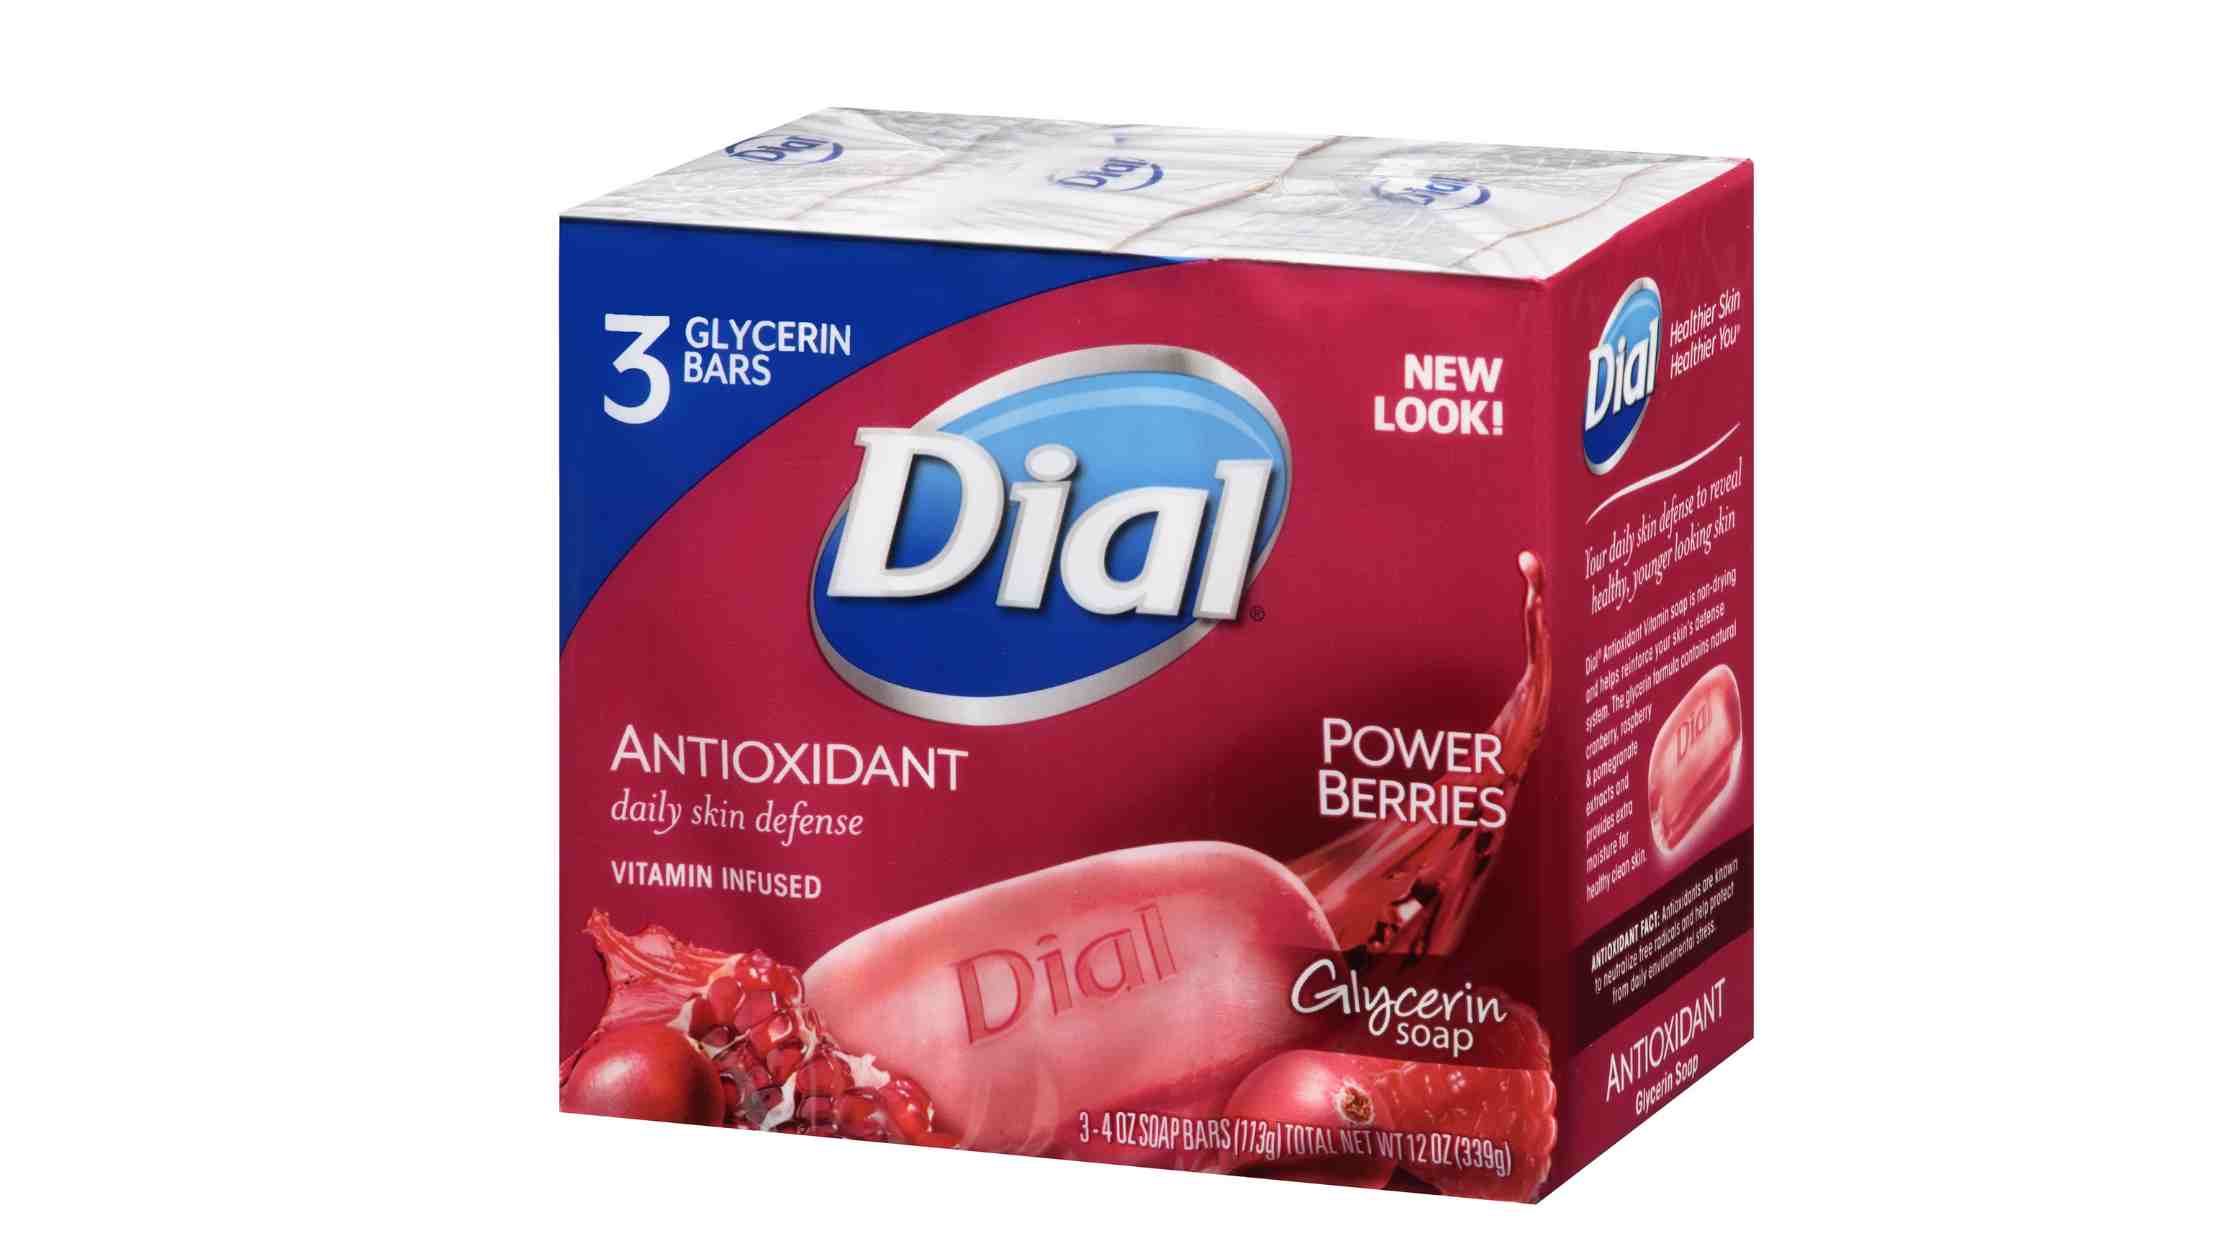 Dial Glycerin soap discontinued